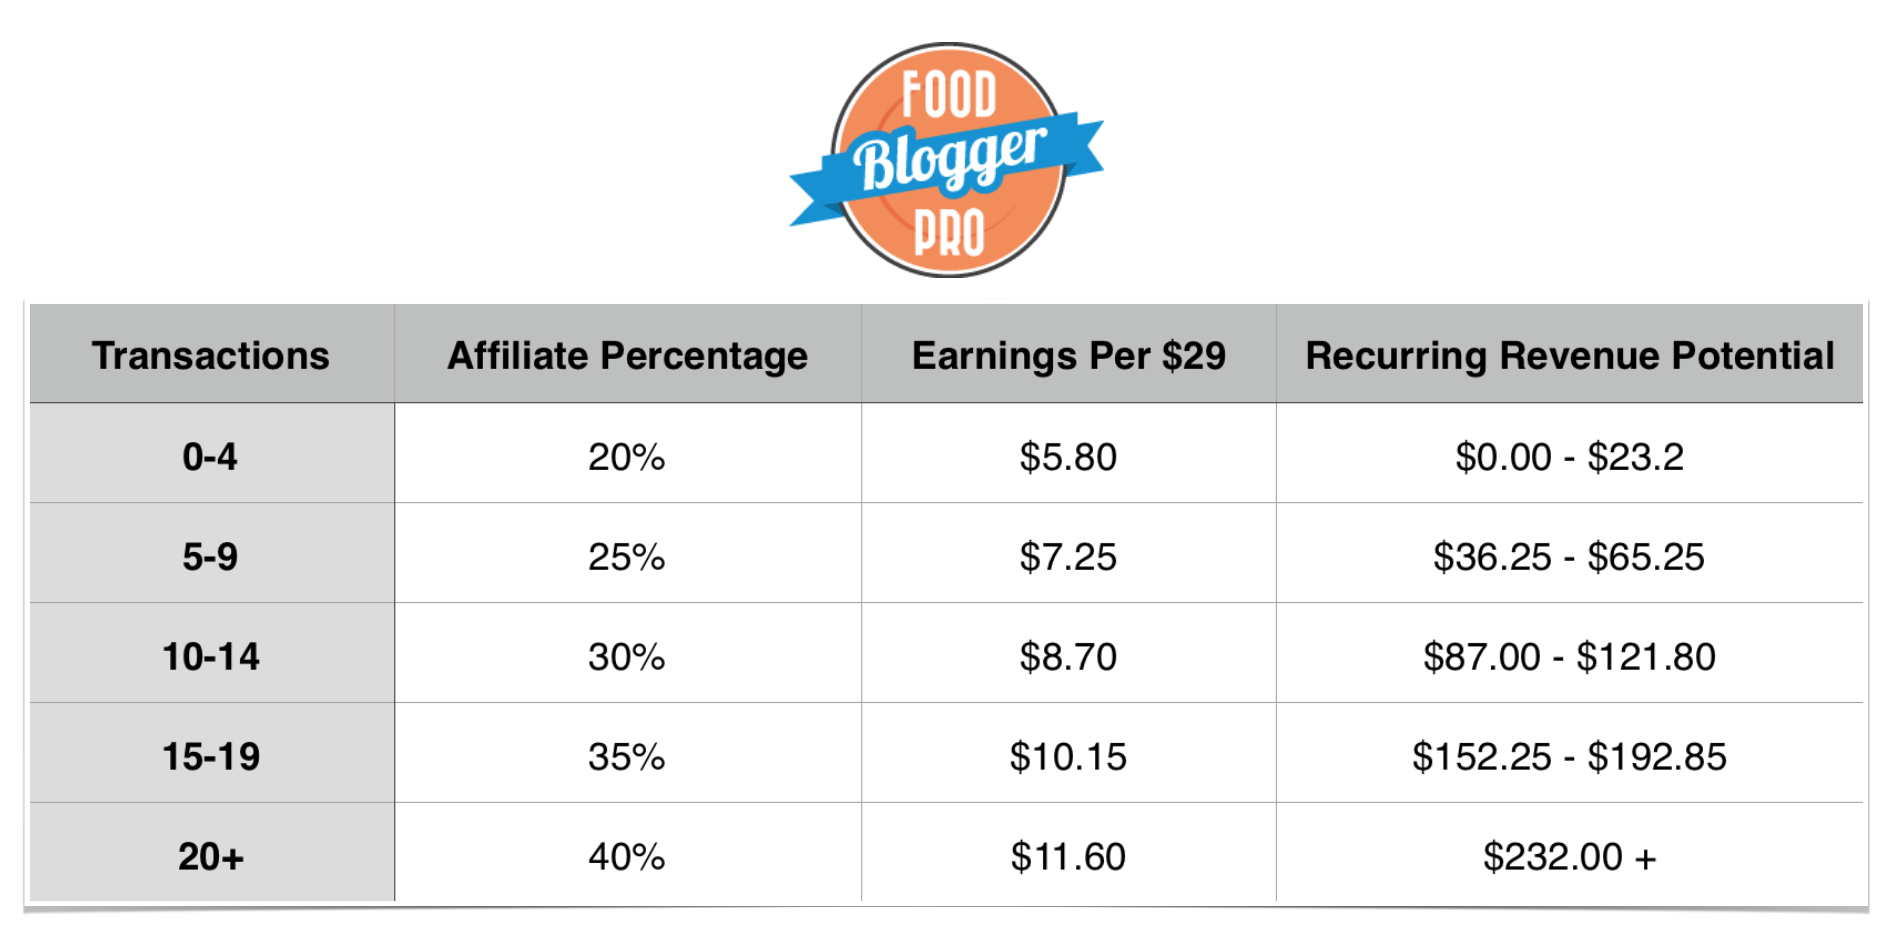 Table that shows transactions, affiliate percentage, earnings per $29, and recurring revenue potential